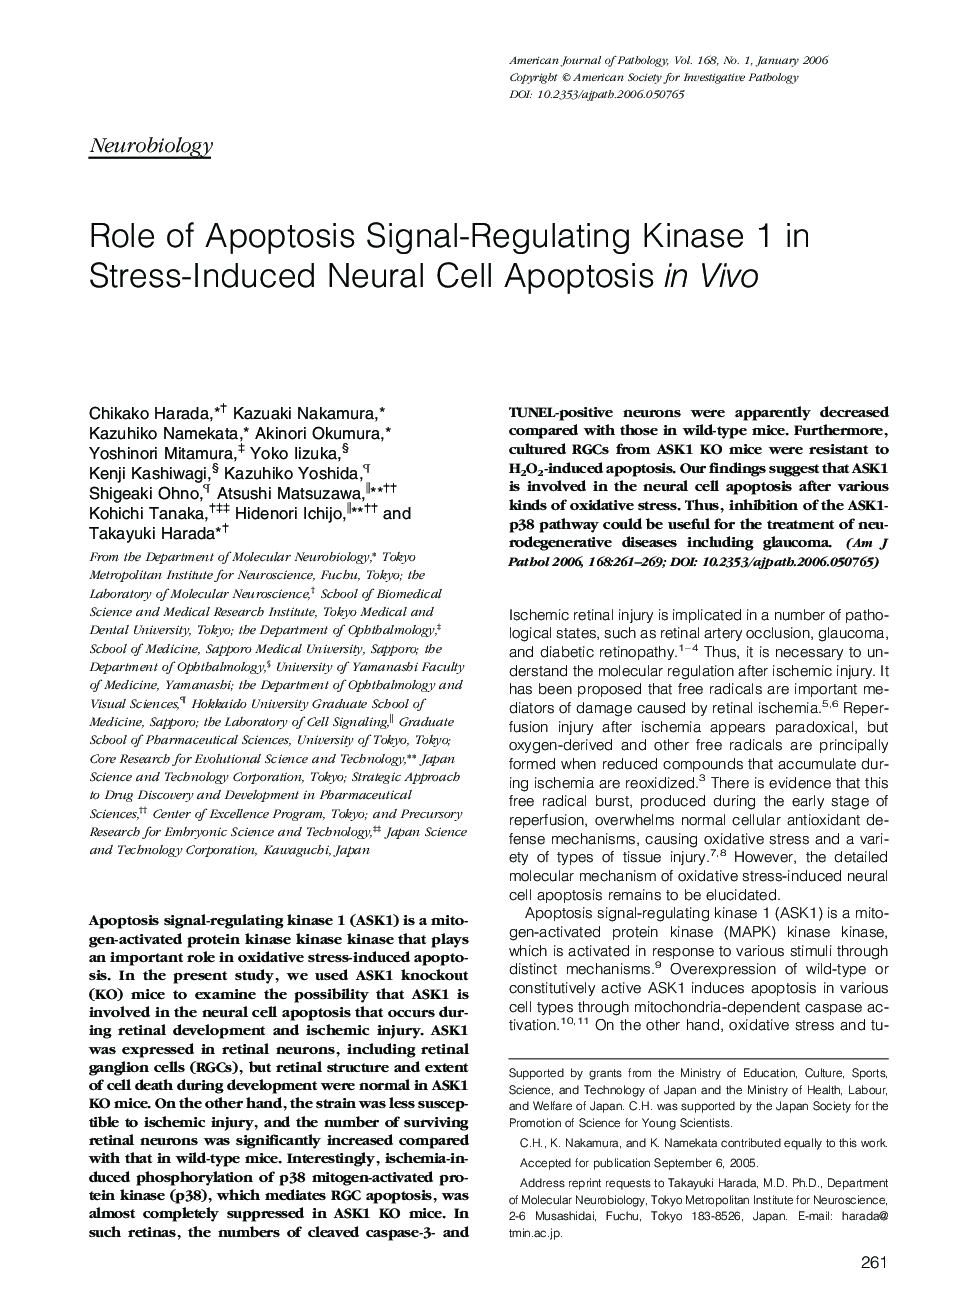 Role of Apoptosis Signal-Regulating Kinase 1 in Stress-Induced Neural Cell Apoptosis in Vivo